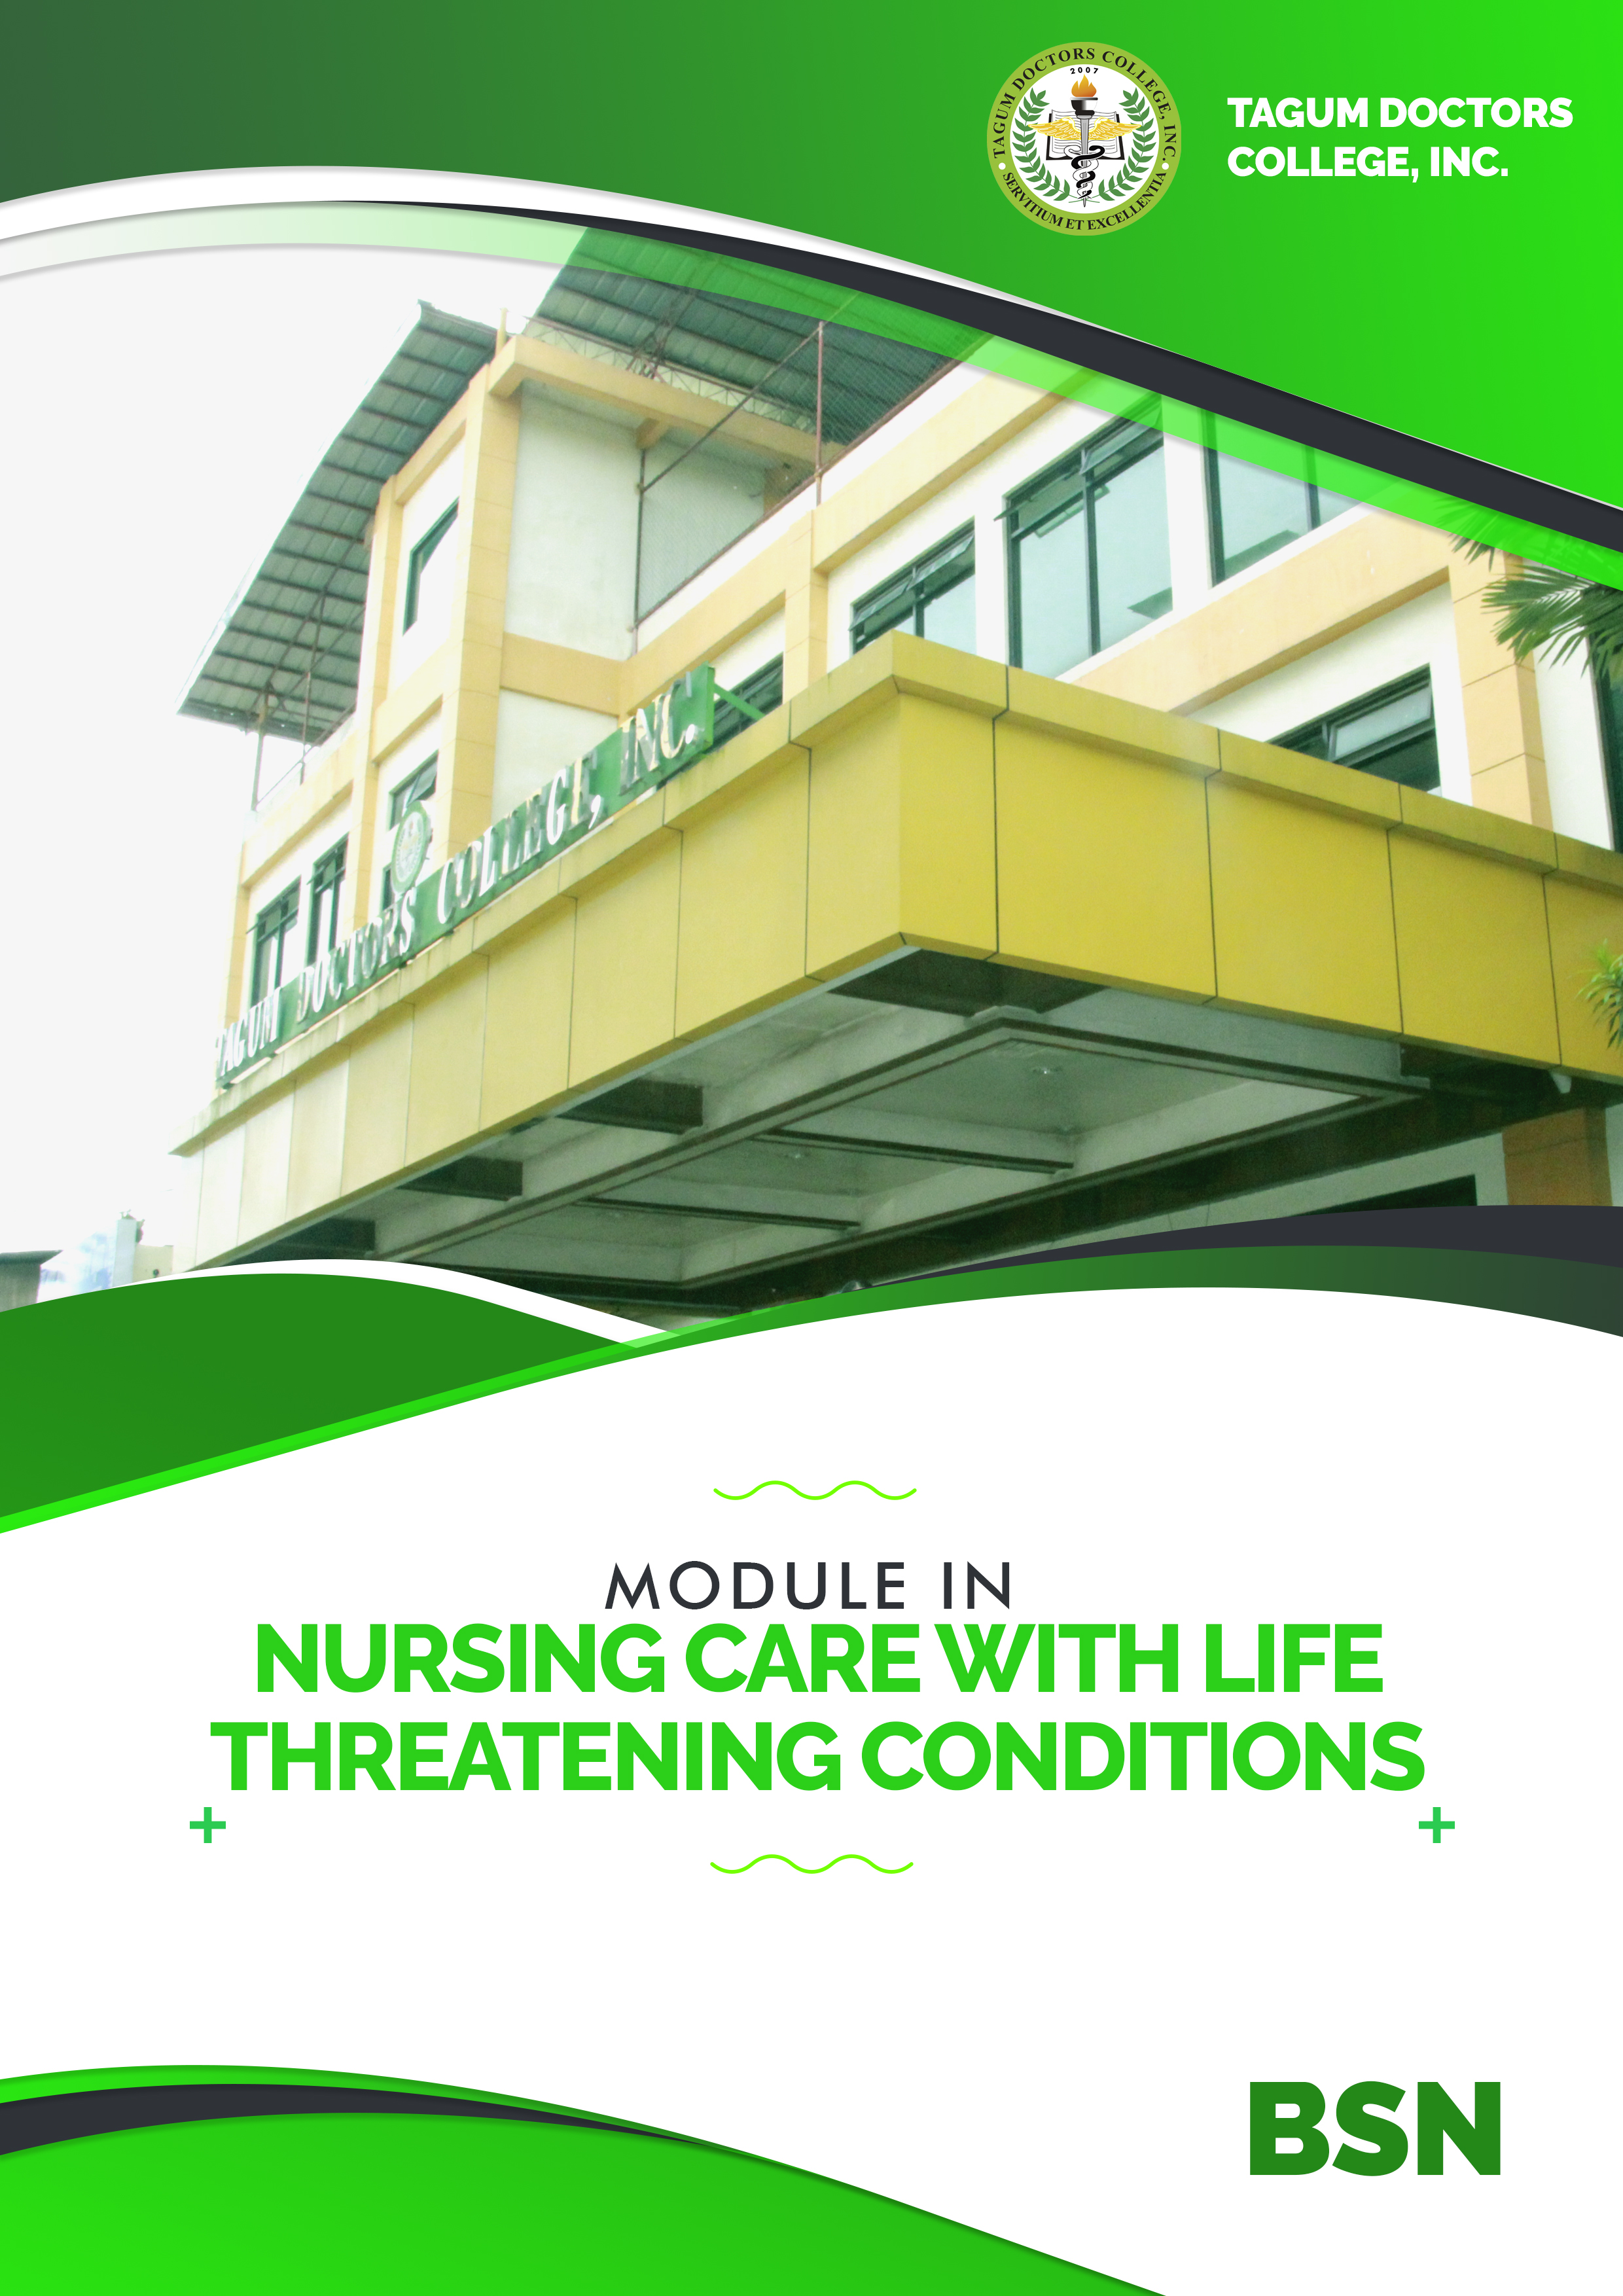 Nursing Care of Clients with Life Threatening Conditions,Acutely lll/Multi Organ Problems . High Acuity and Emergrncy Situations,Acute and Chronic - BSN 4A